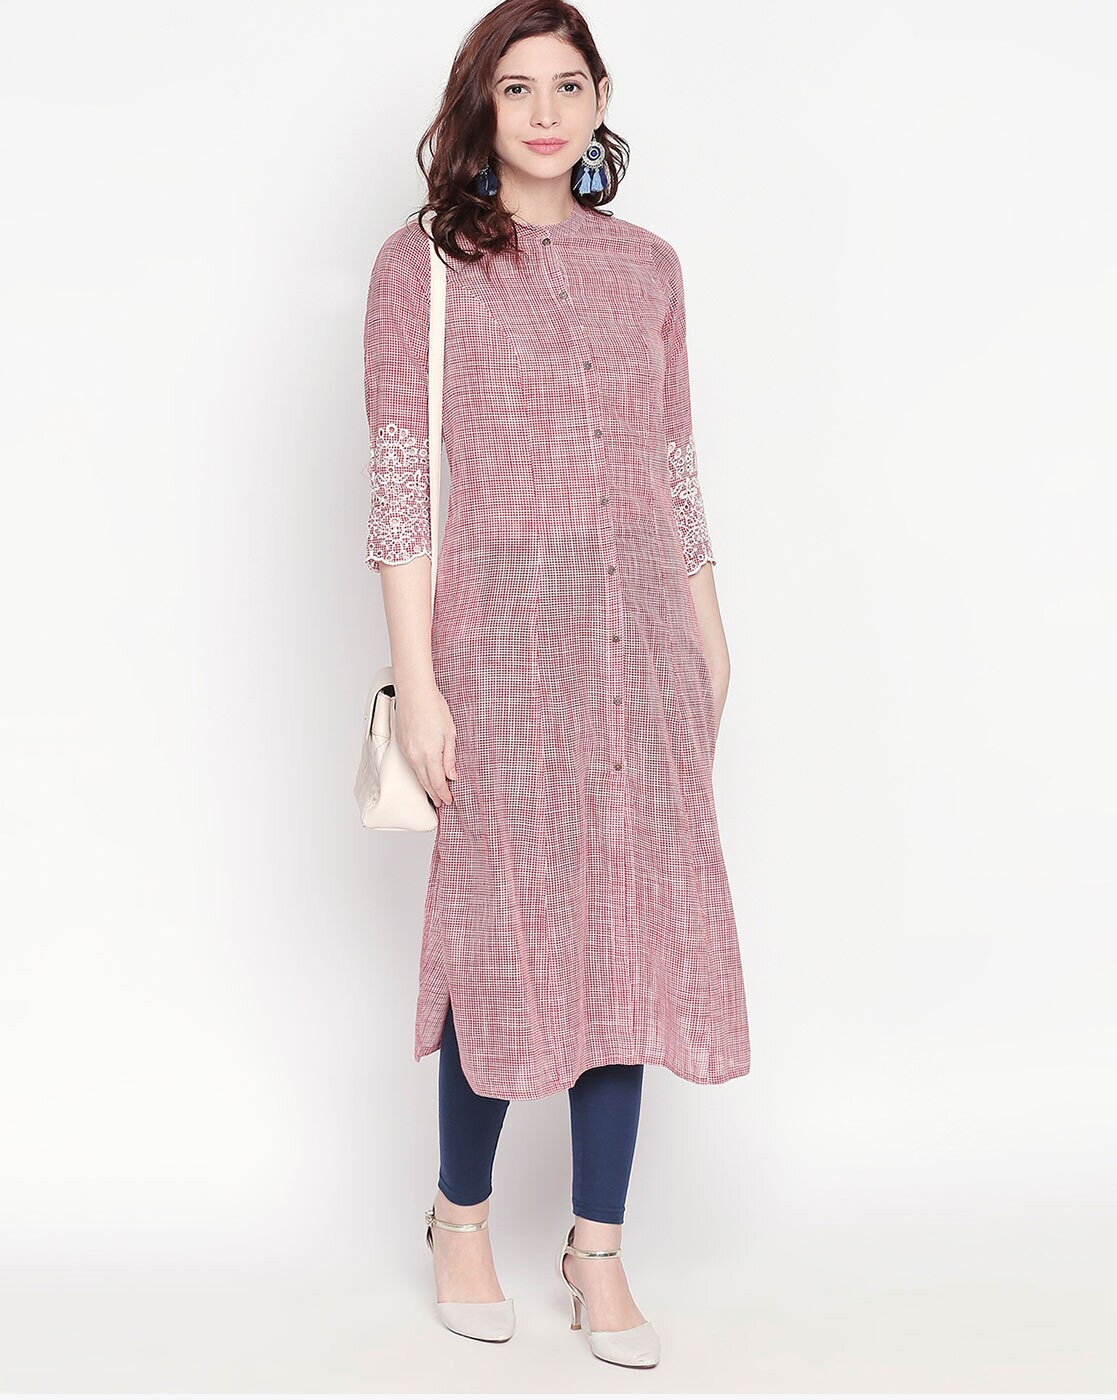 Buy RED Kurtas for Women by Rangmanch by Pantaloons Online